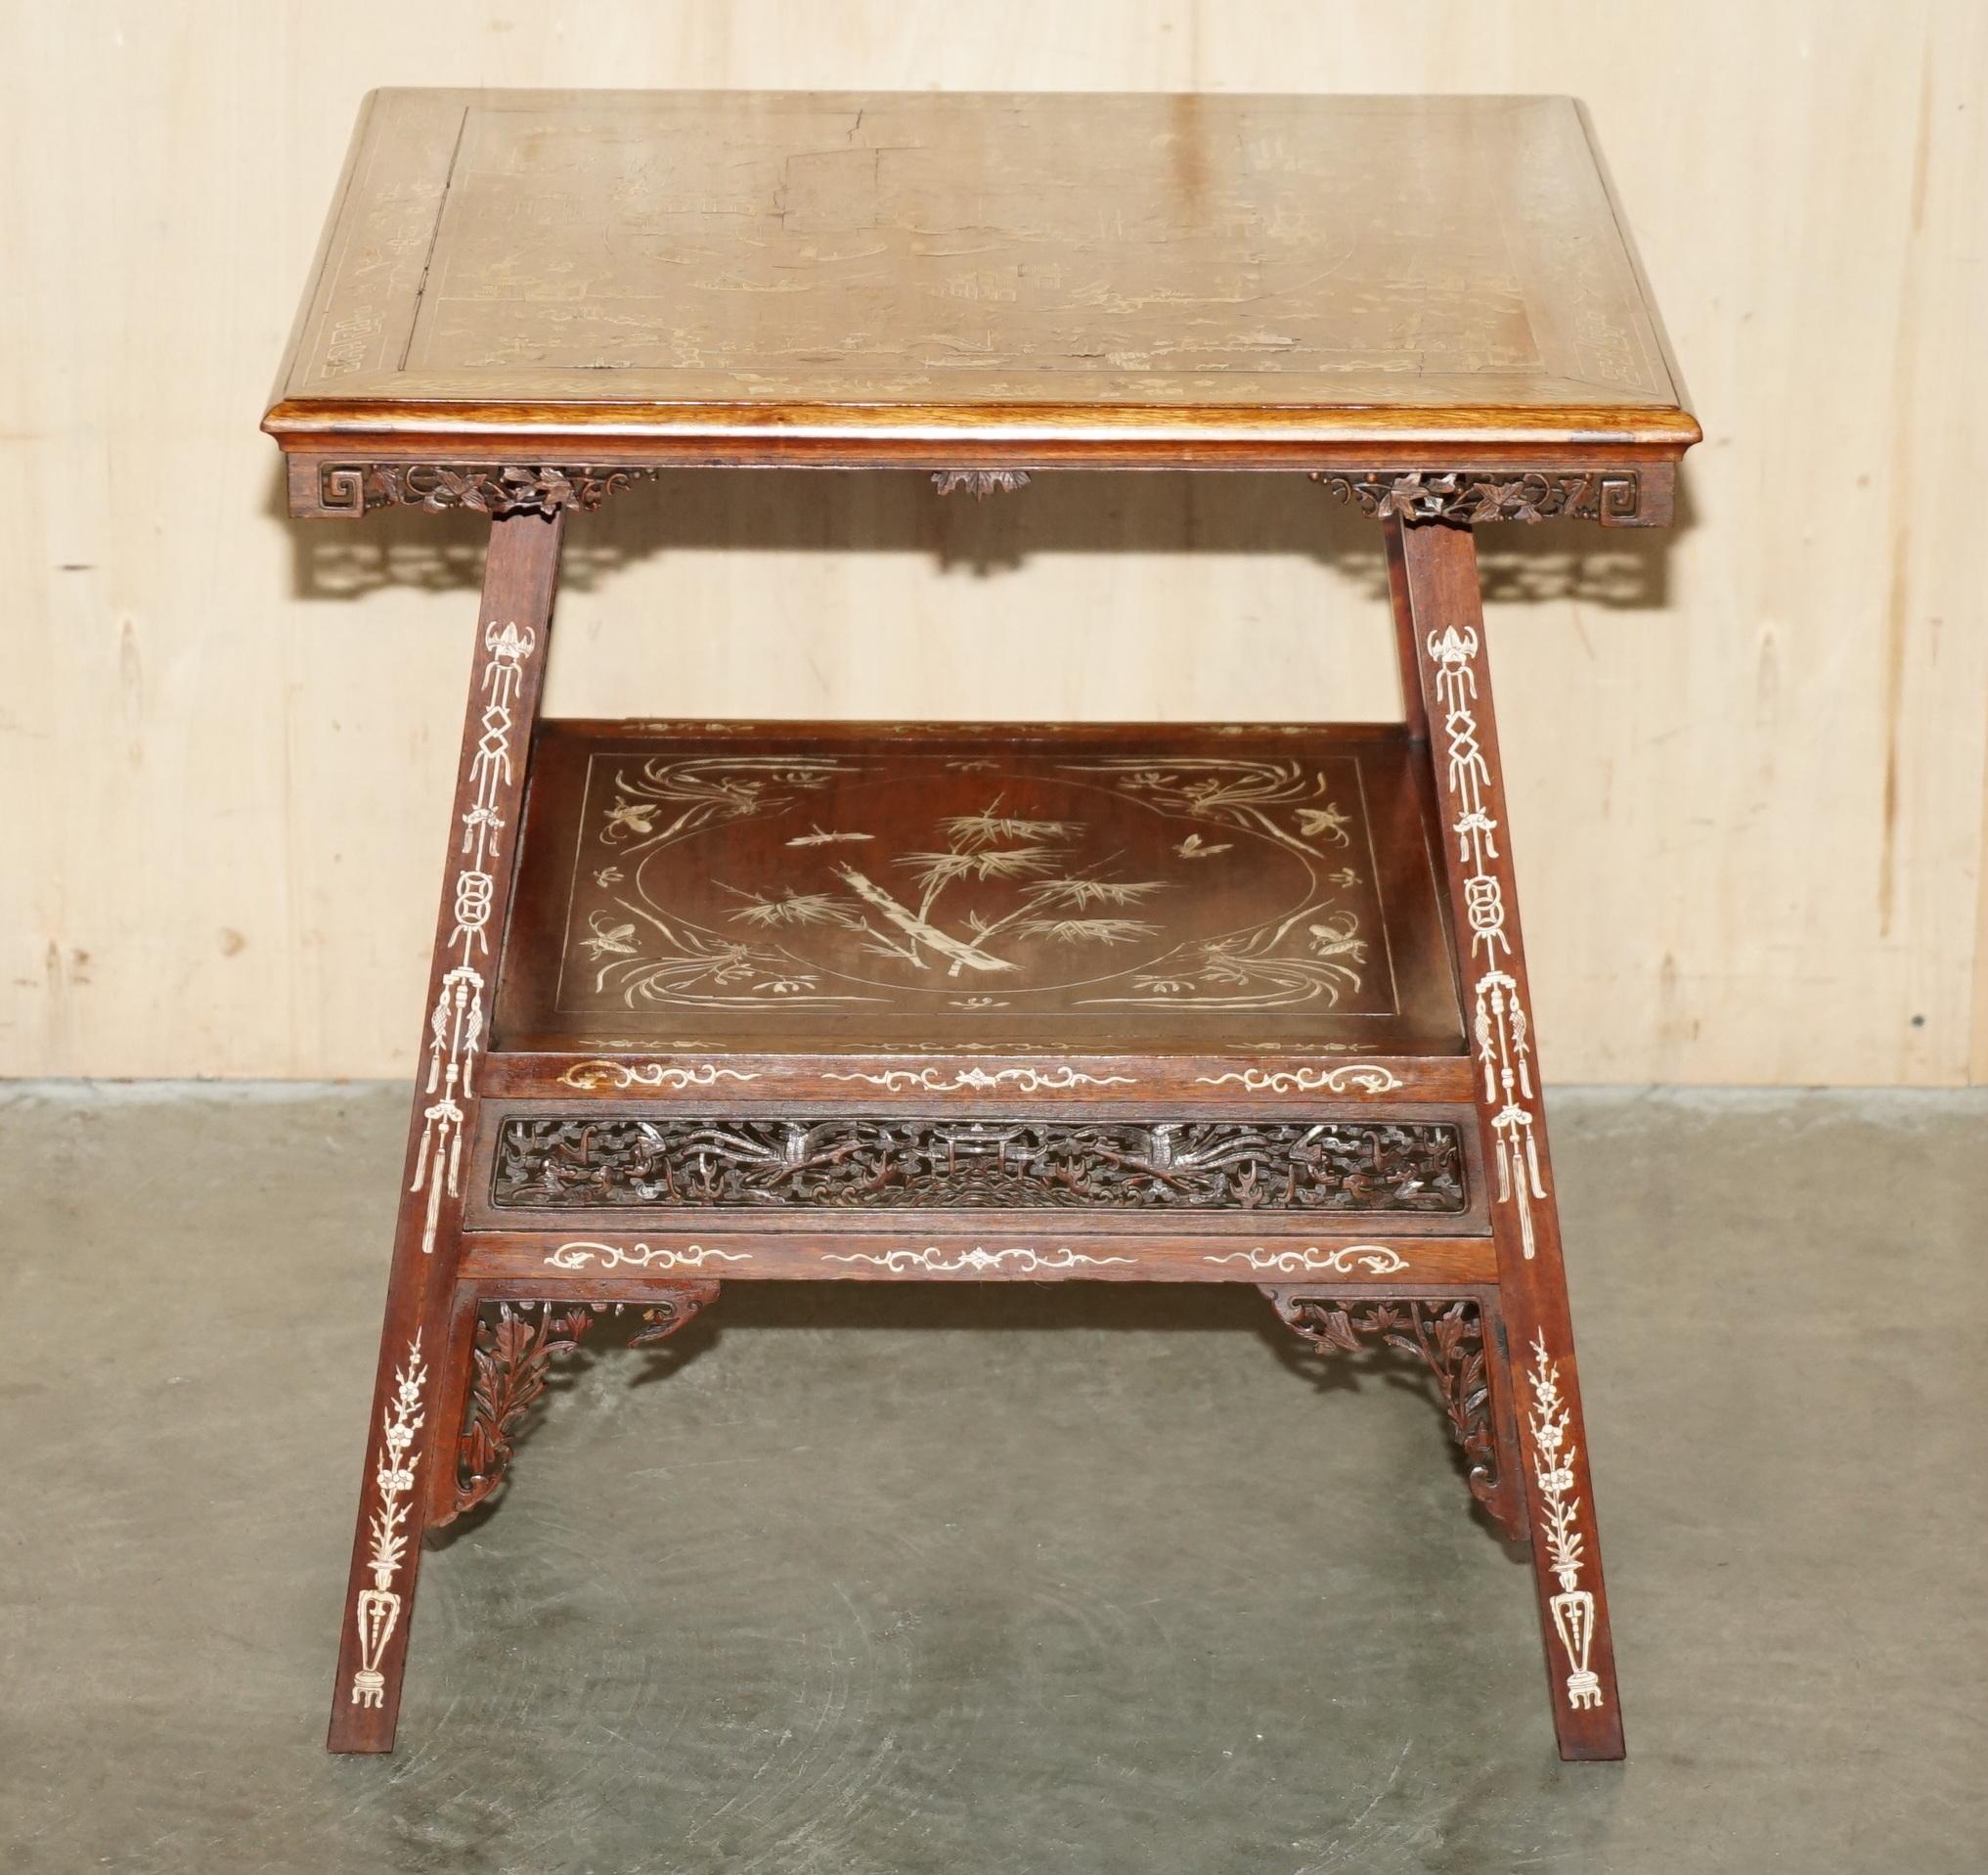 Chinese Export ANTIQUE CIRCA 1900 ORNATELY CARVED AND HEAViLY INLAID CHINESE OCCASIONAL TABLE For Sale